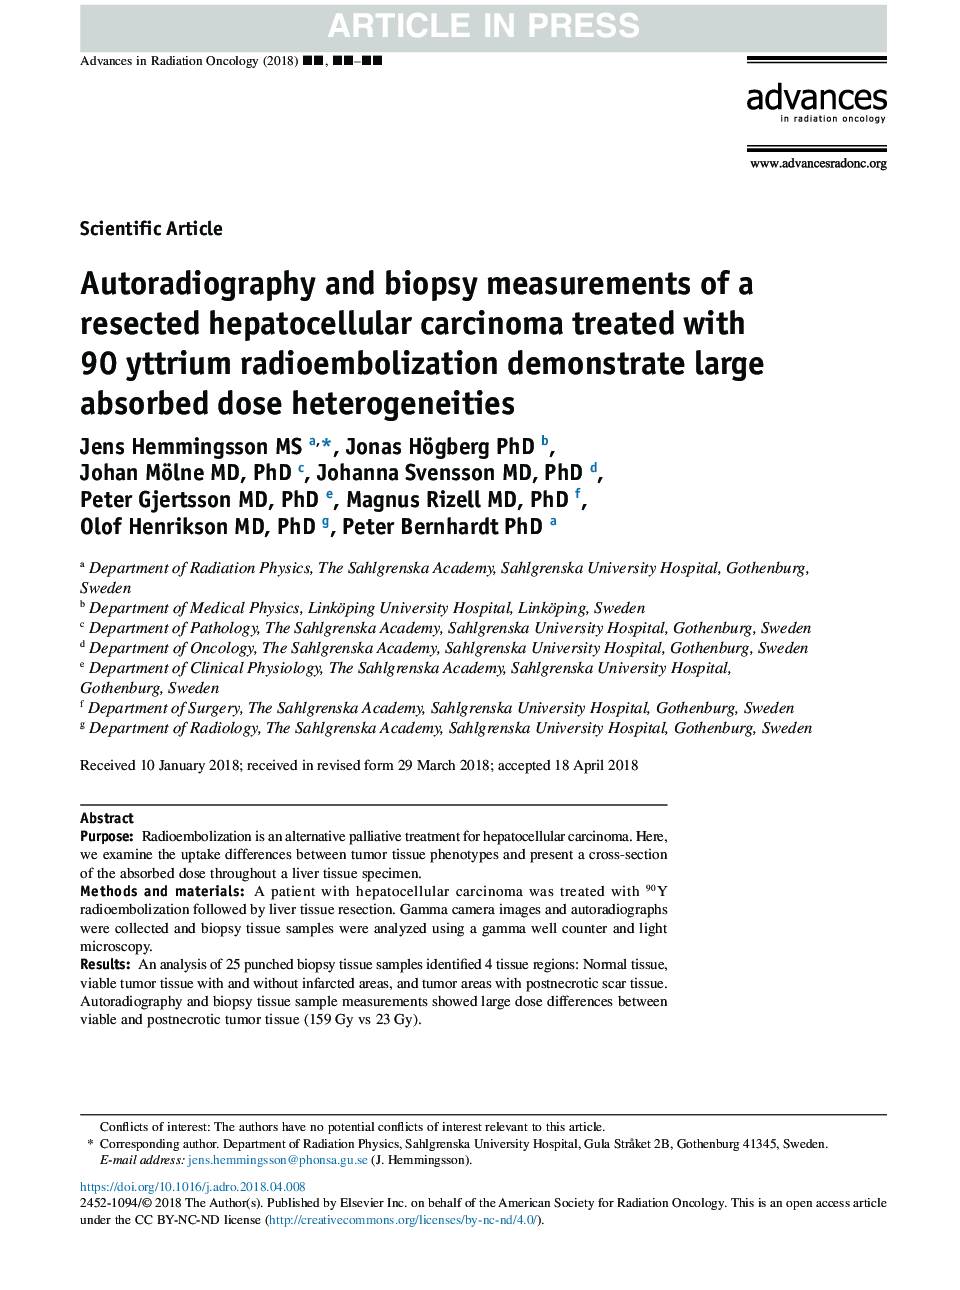 Autoradiography and biopsy measurements of a resected hepatocellular carcinoma treated with 90 yttrium radioembolization demonstrate large absorbed dose heterogeneities